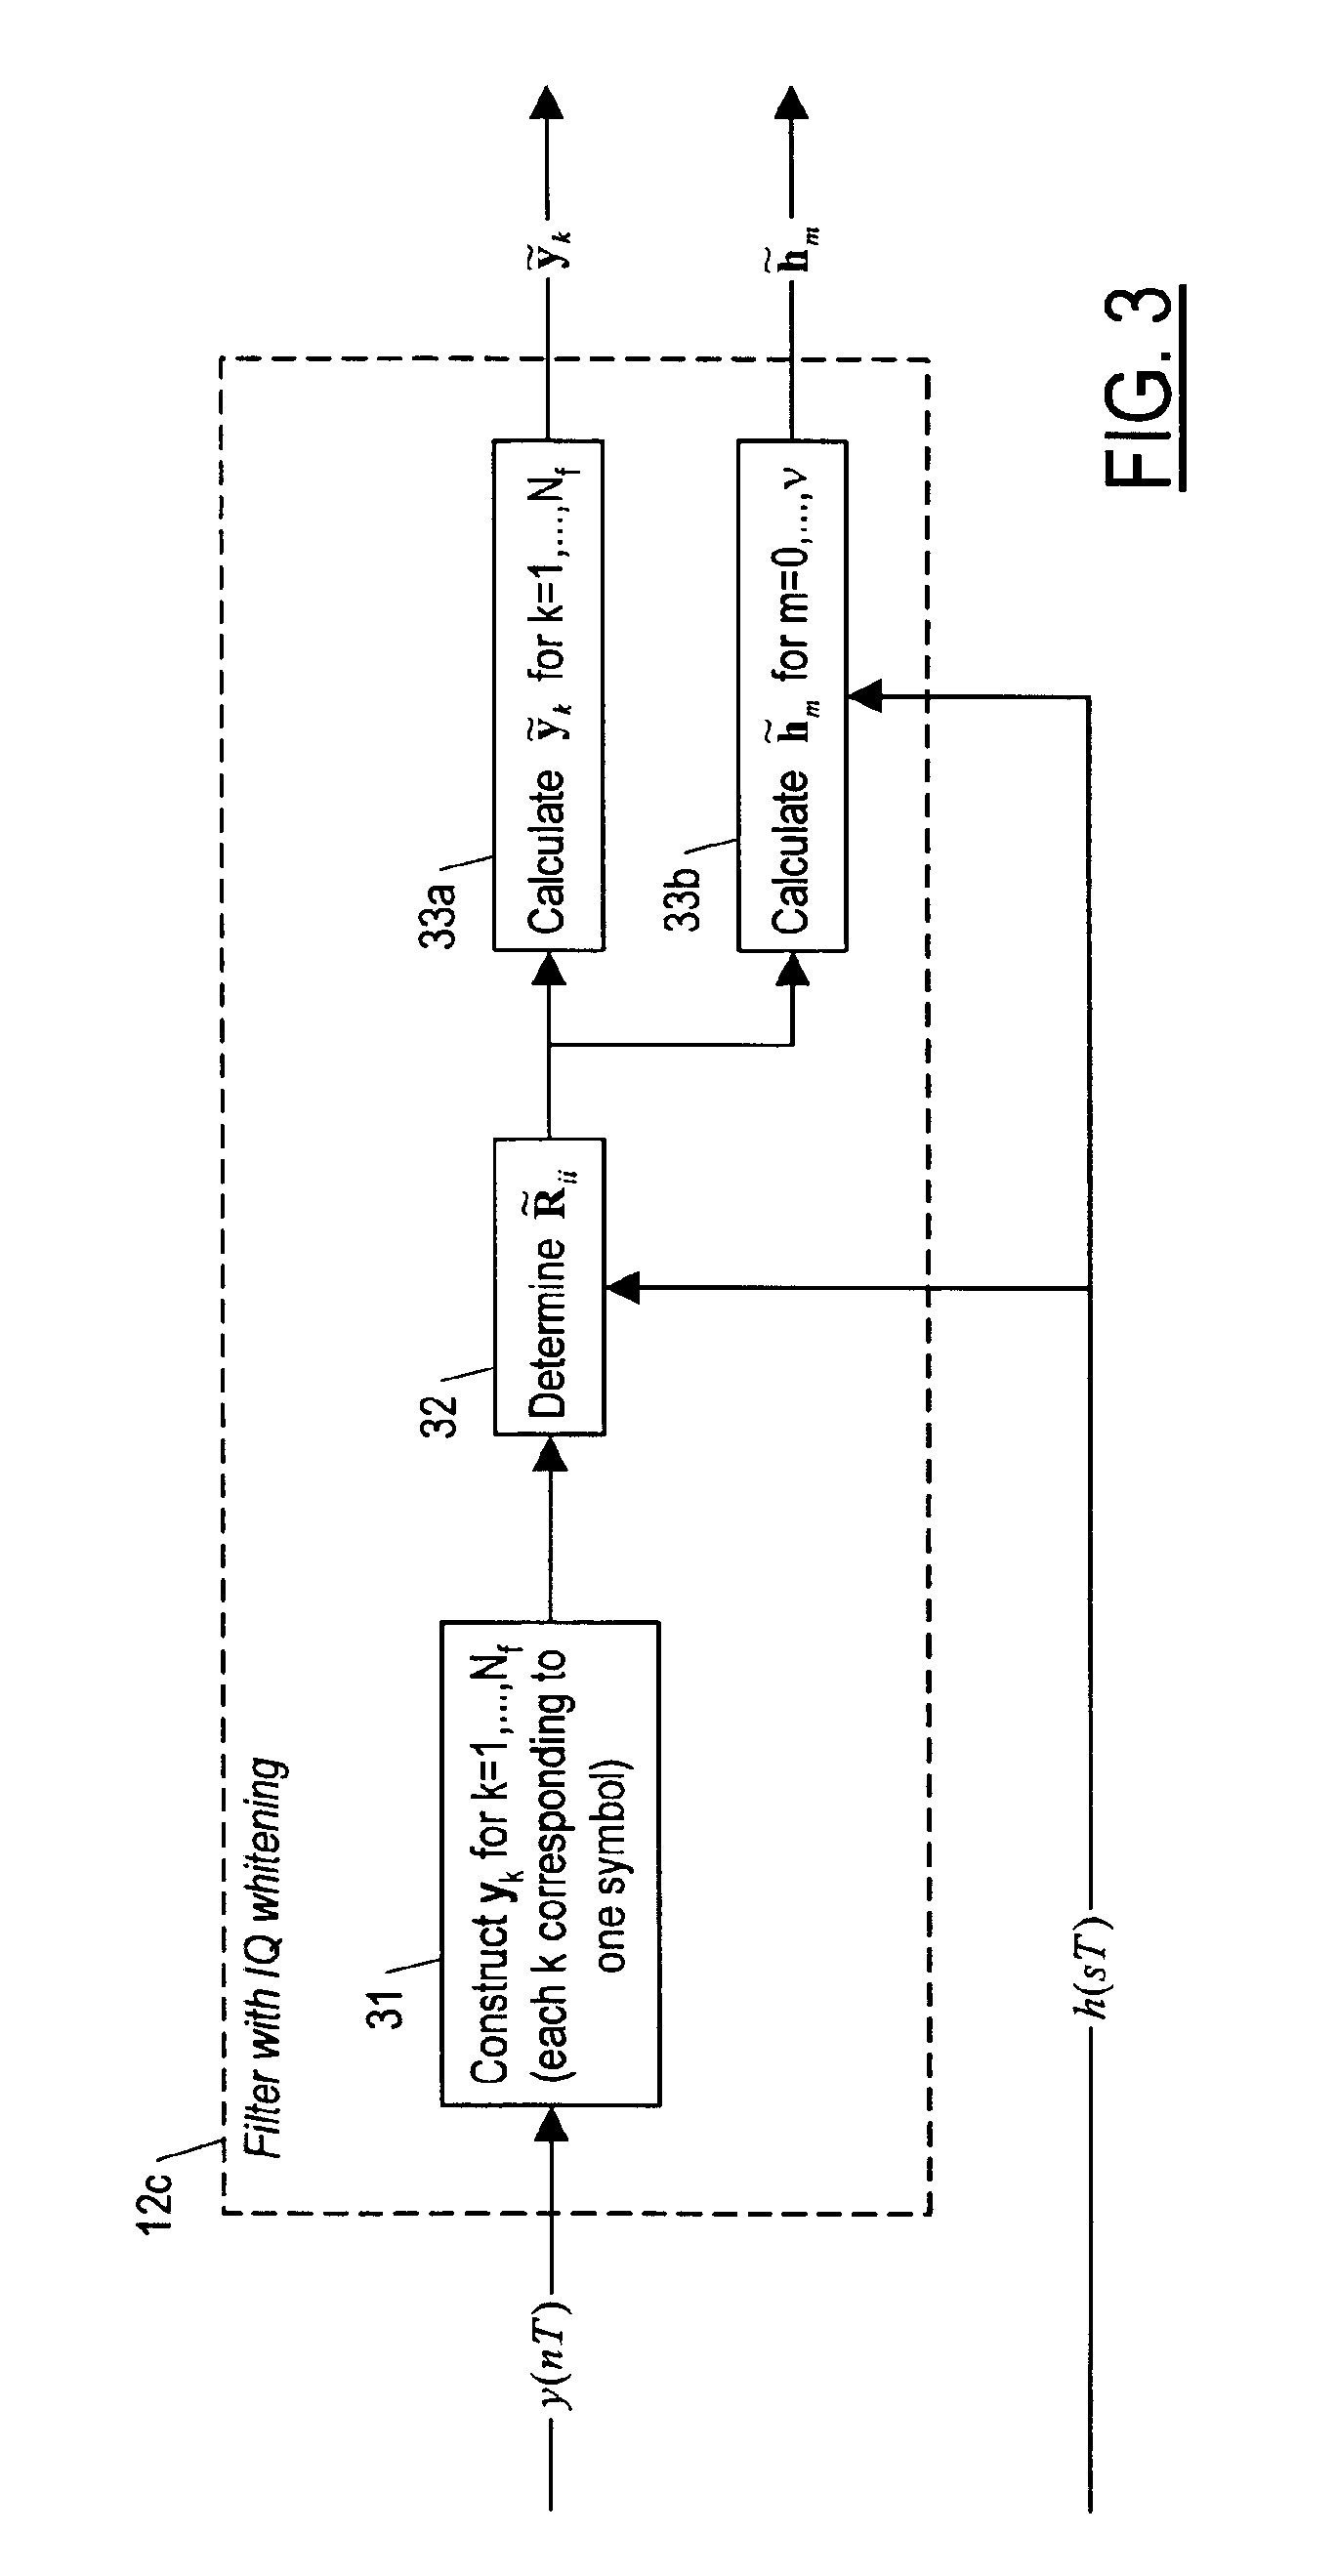 Method and apparatus for suppressing co-channel interference in a receiver